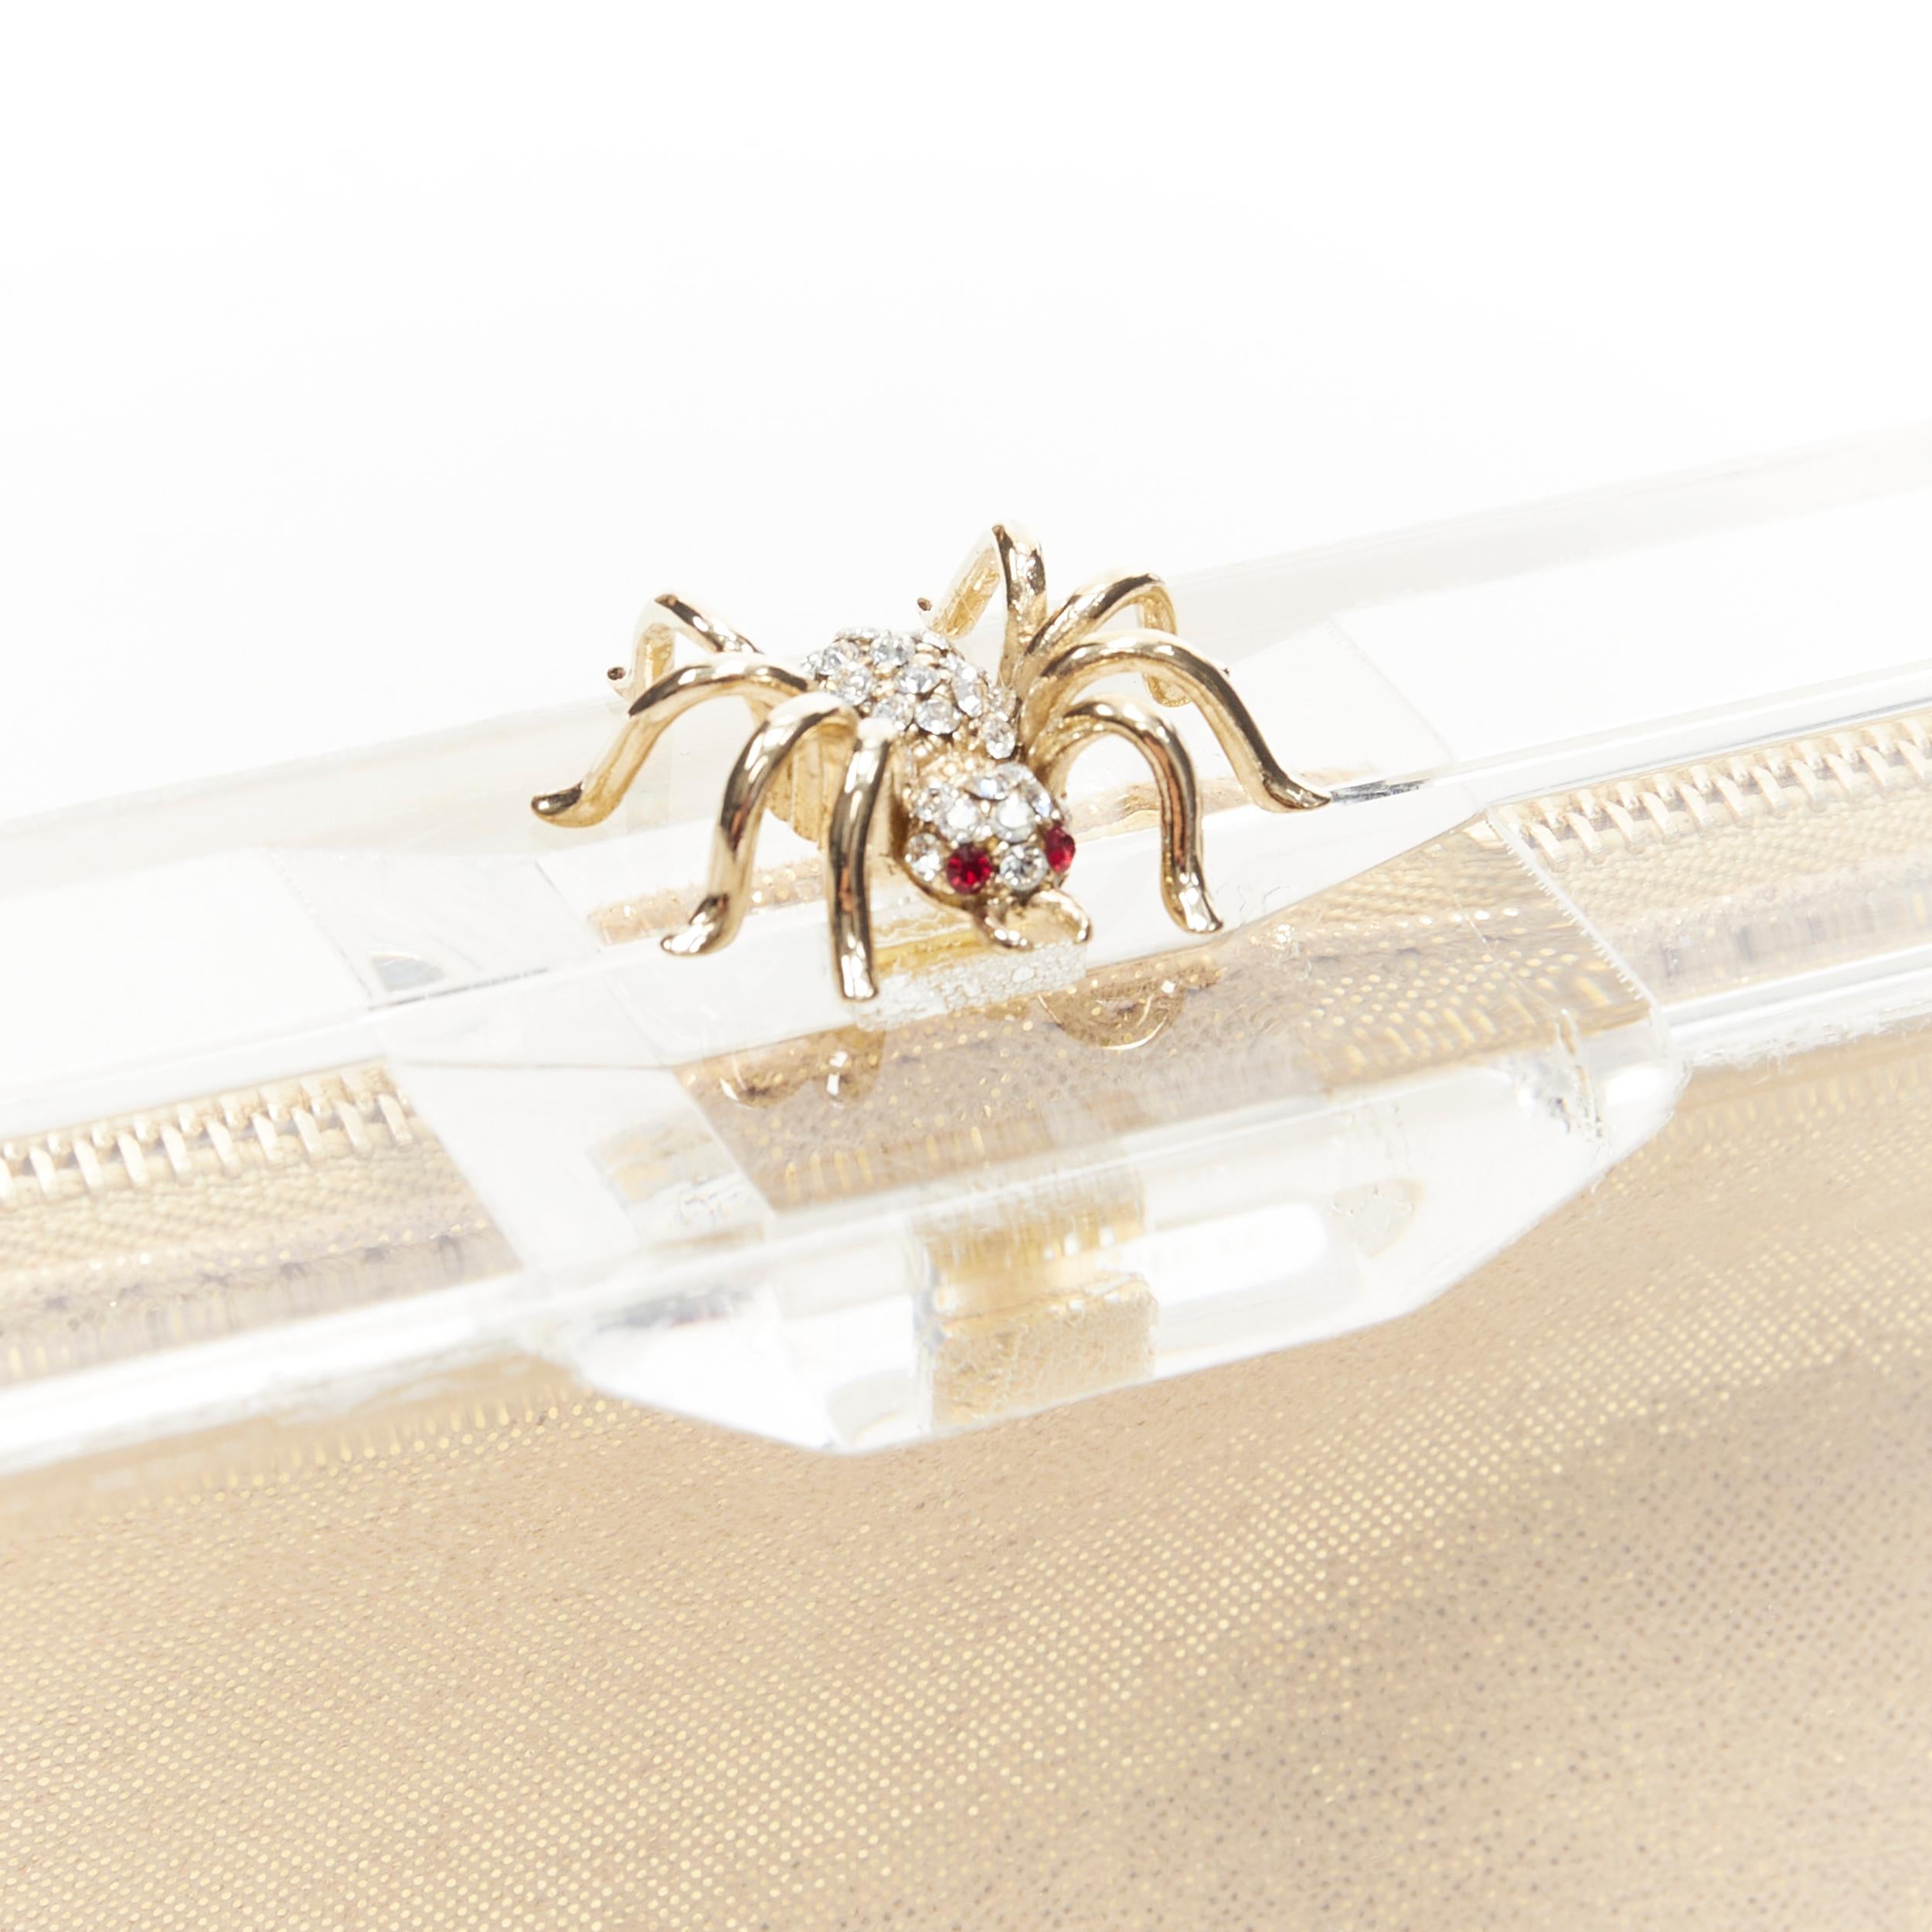 Beige new CHARLOTTE OLYMPIA Pandora crystal spider clear perspex PVC box clutch